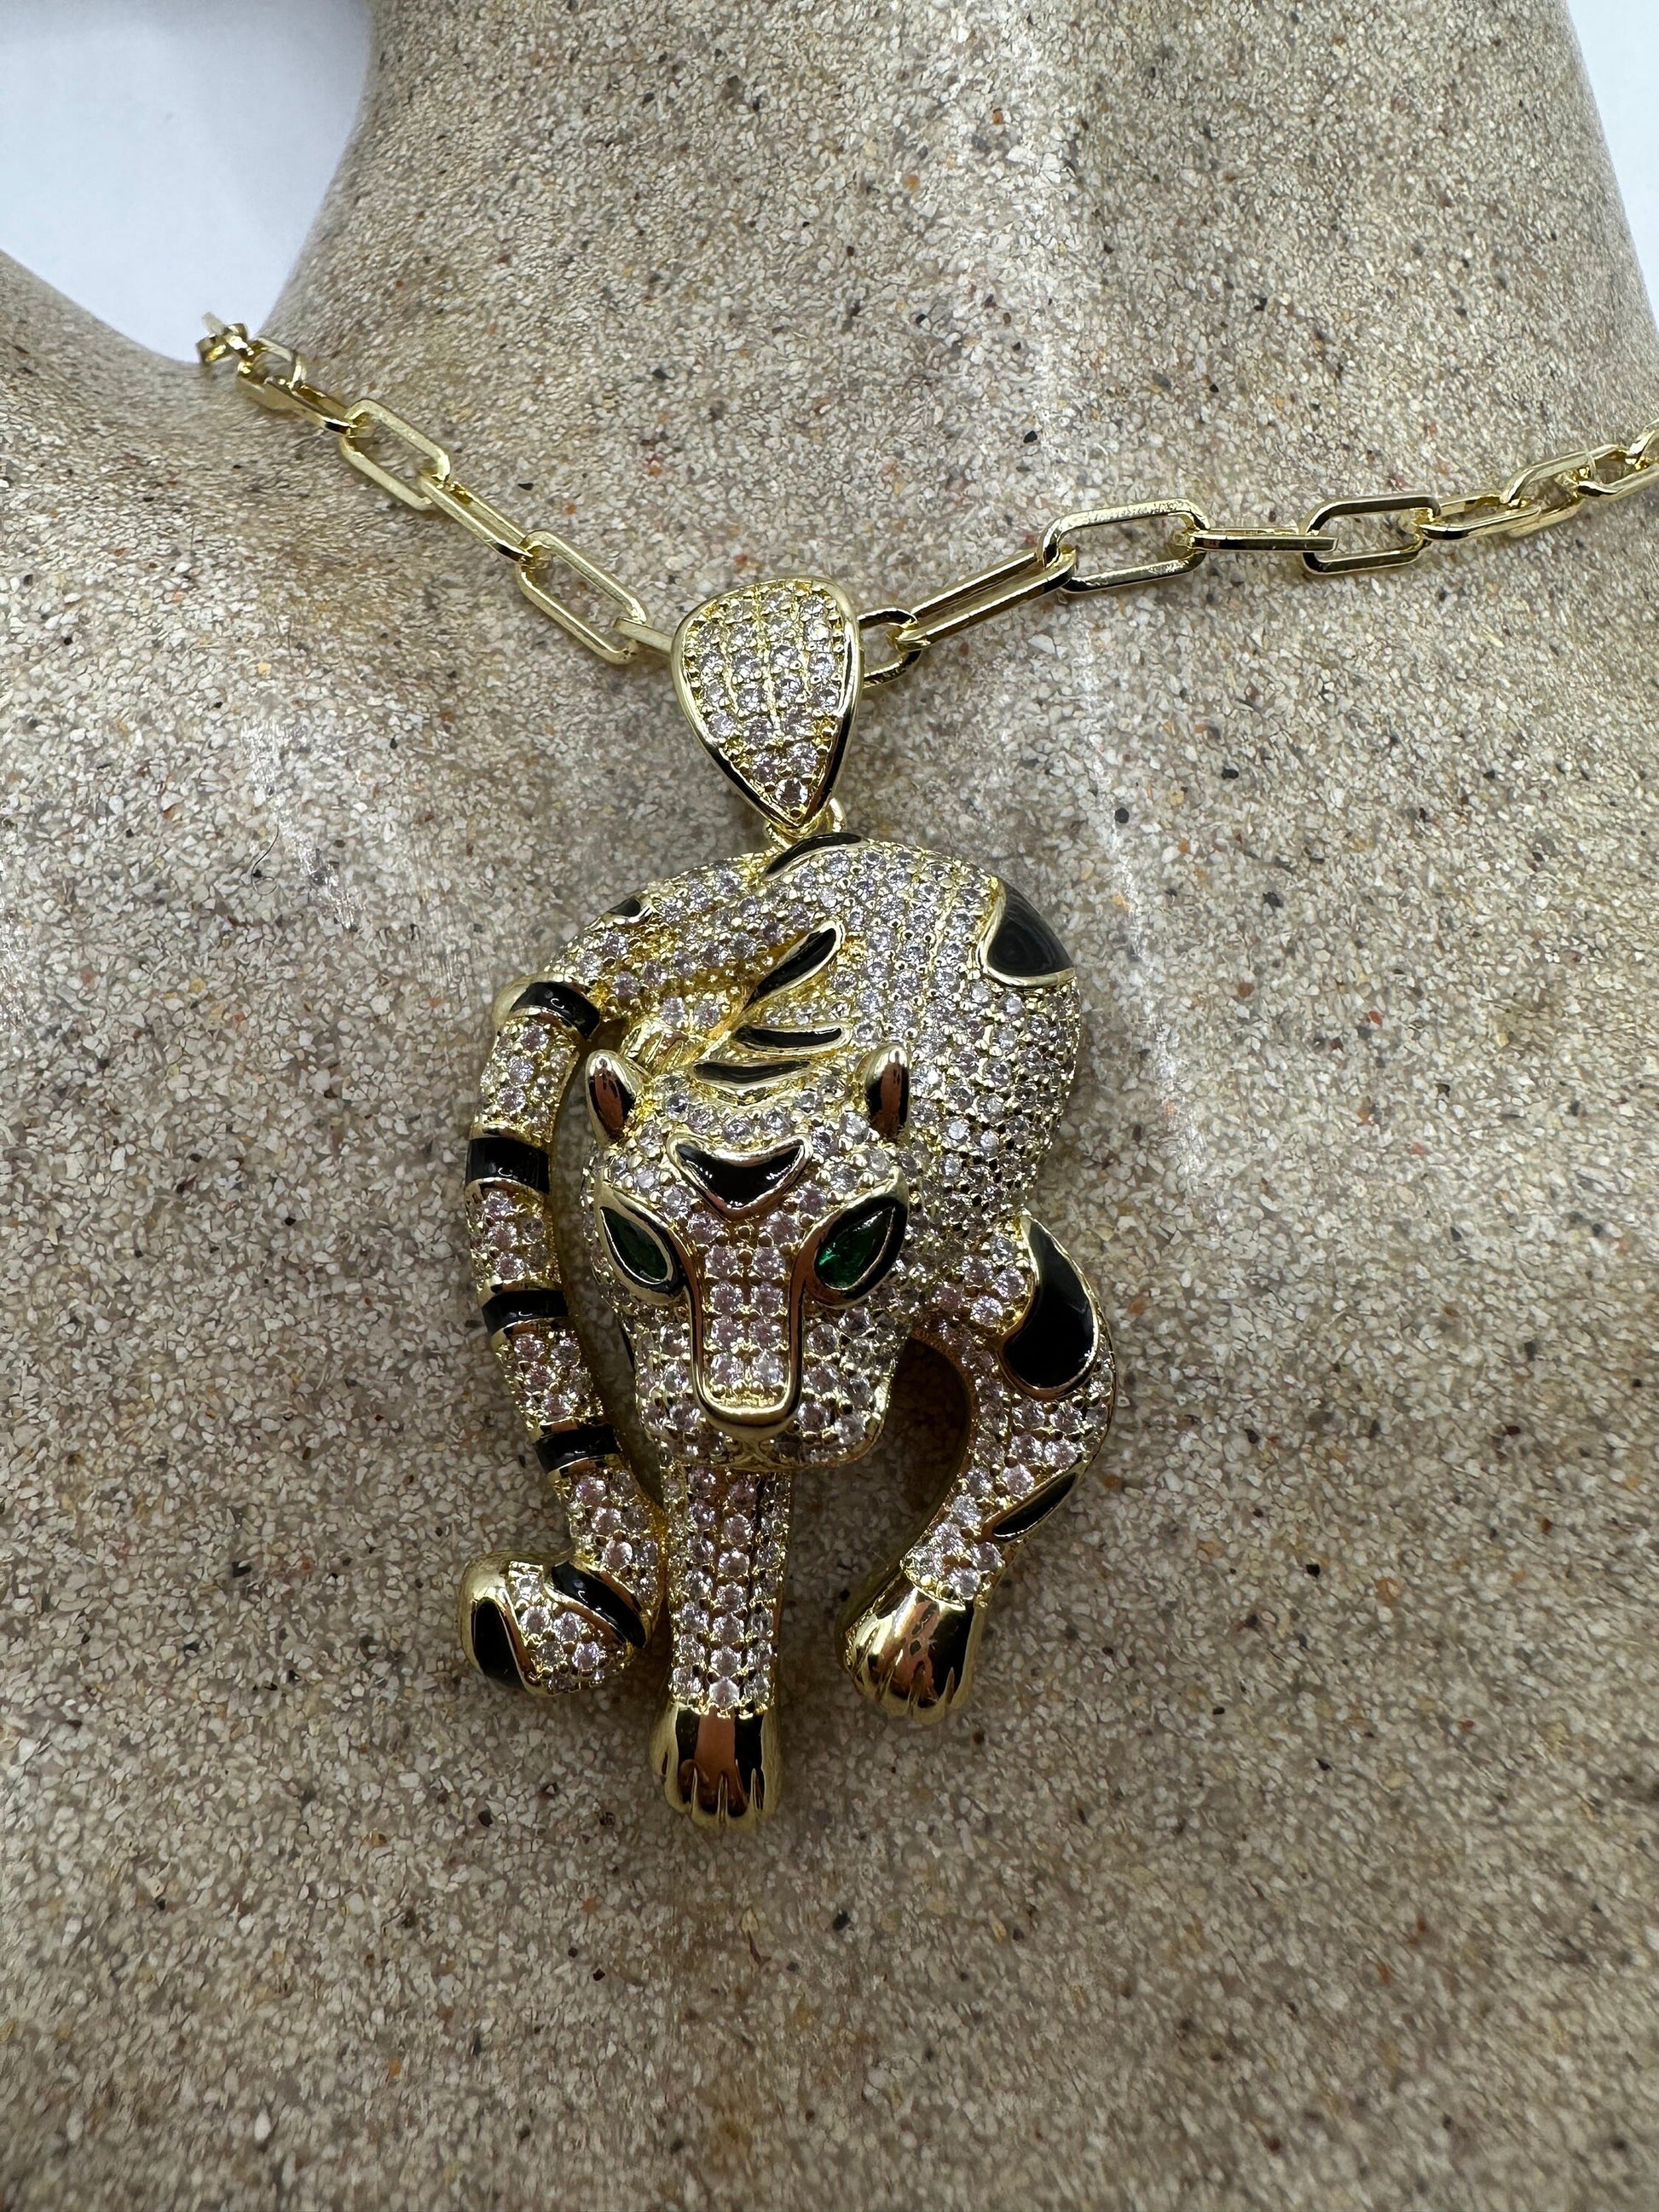 Vintage Cougar Chain Necklace Gold filled Black and White Crystal